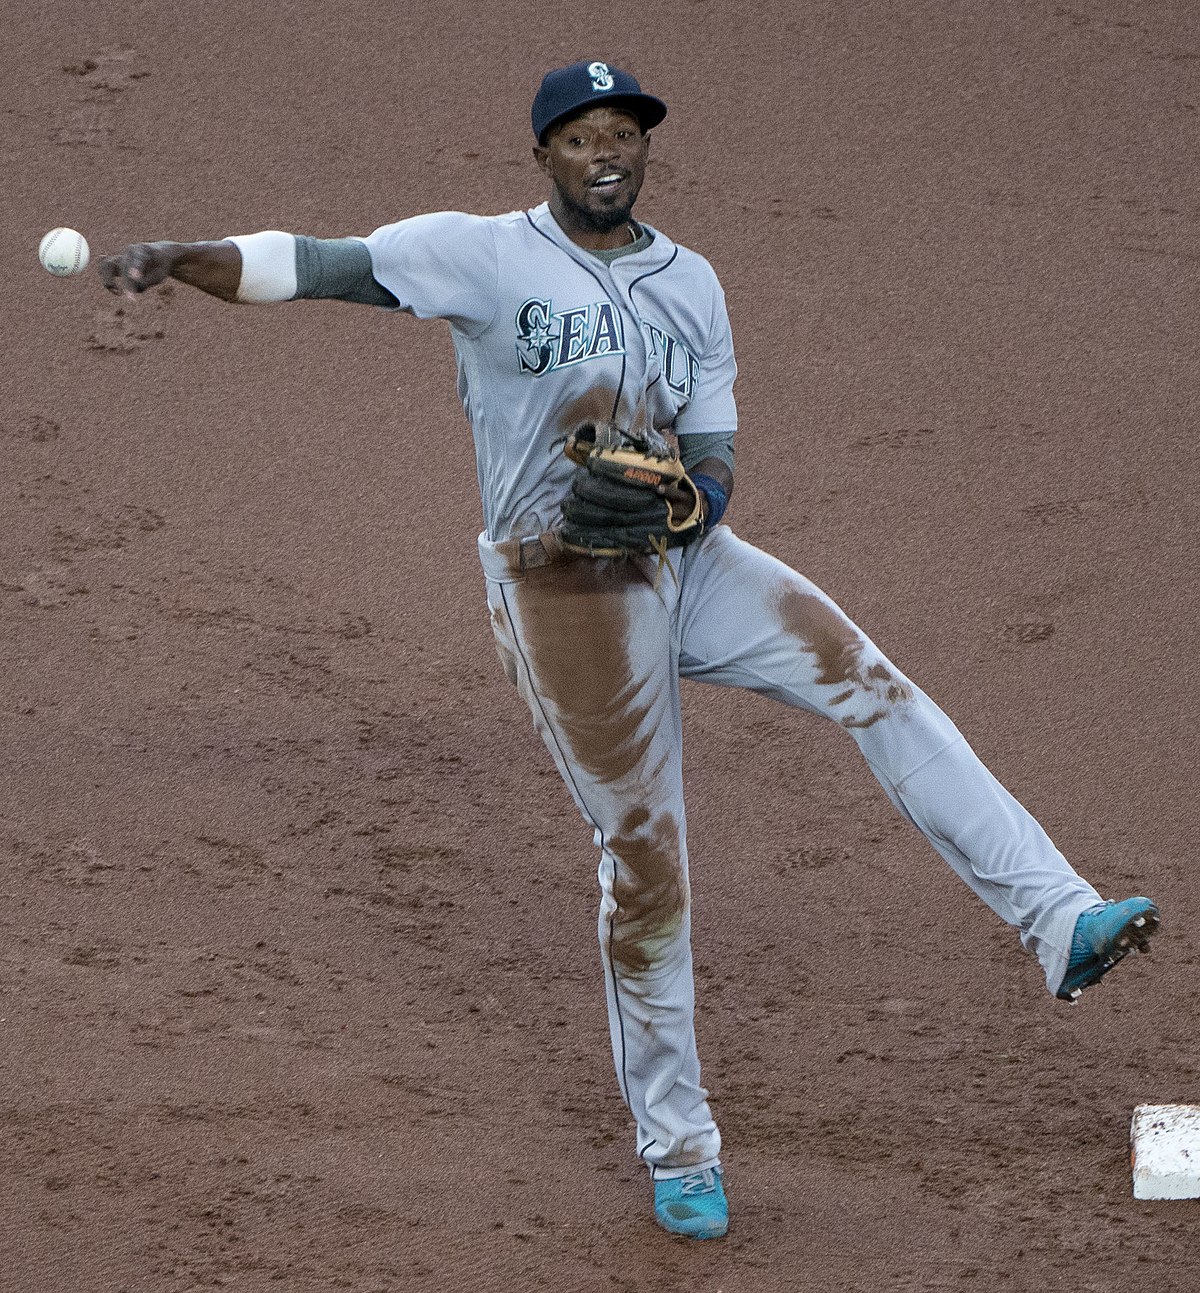 Report: Cubs signing Dee Strange-Gordon to minor-league deal